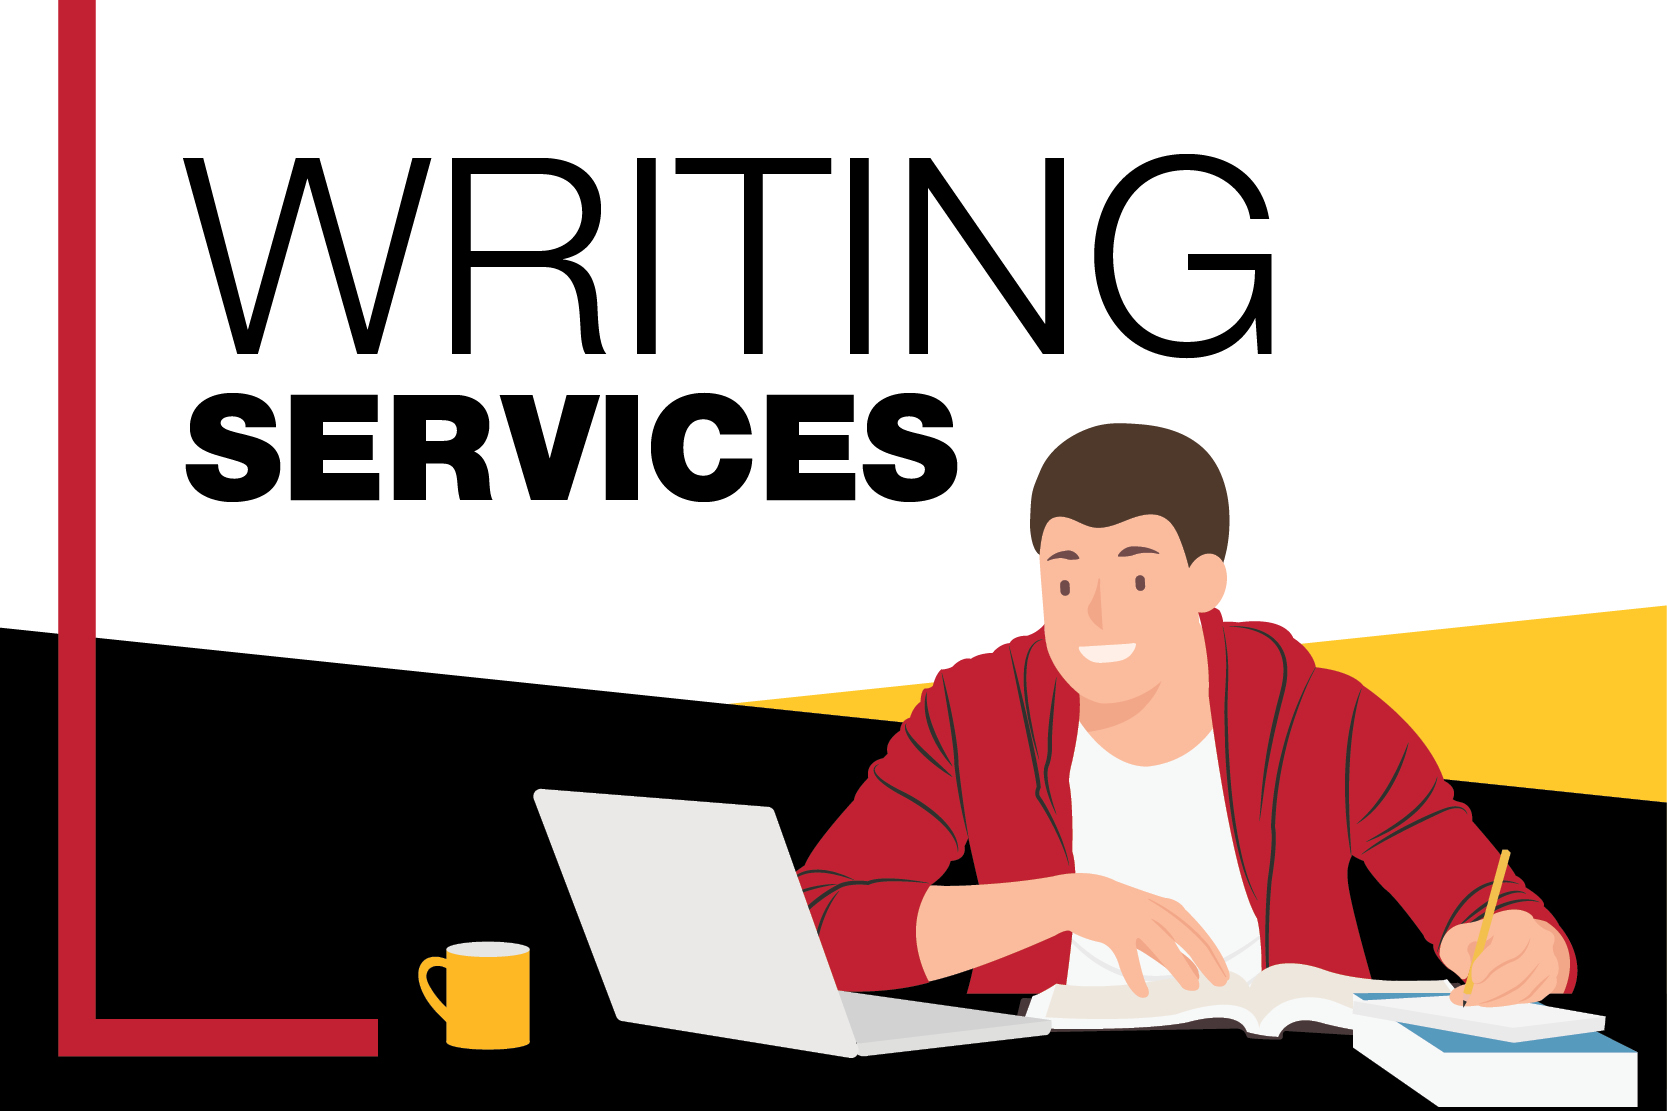 Graphic of a person sitting in front of a laptop and an open book. The person is writing something. The text on the graphic reads "Writing Services."